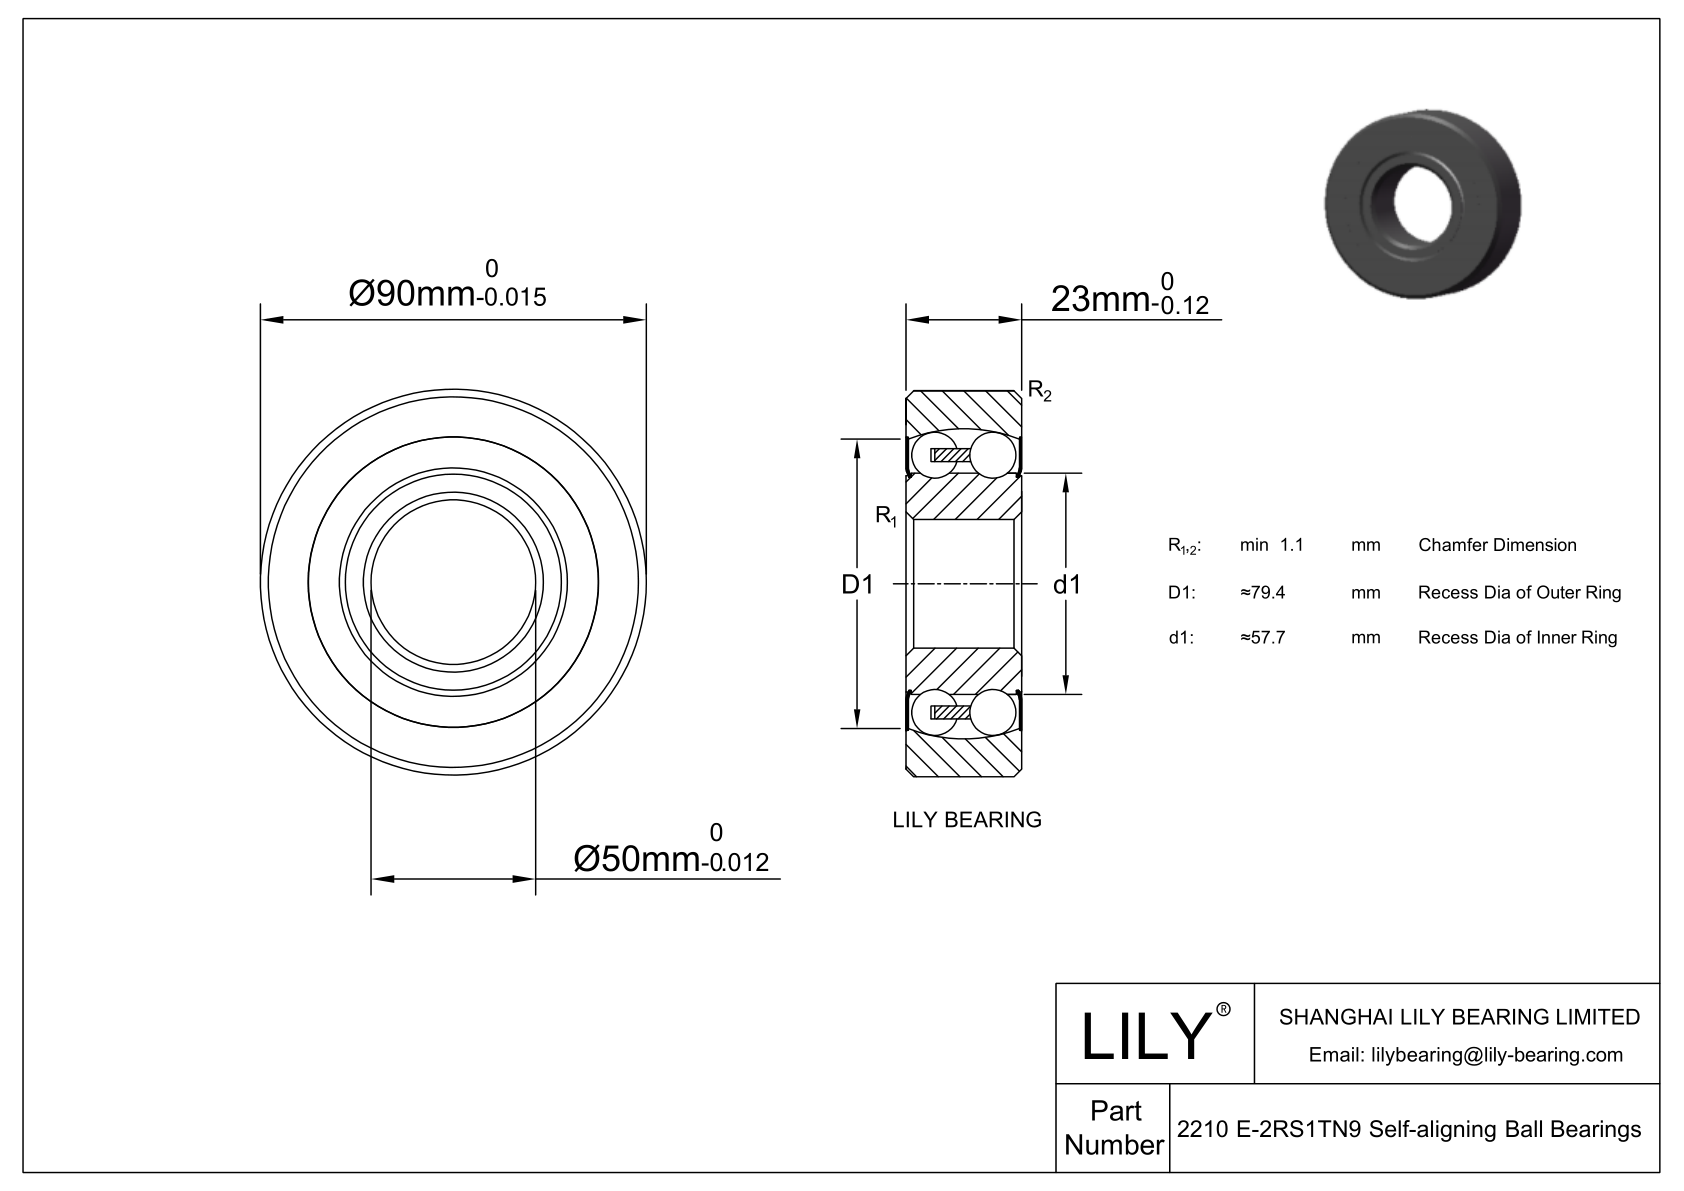 S2210 E-2RS1TN9 Stainless Steel Self Aligning Ball Bearings cad drawing